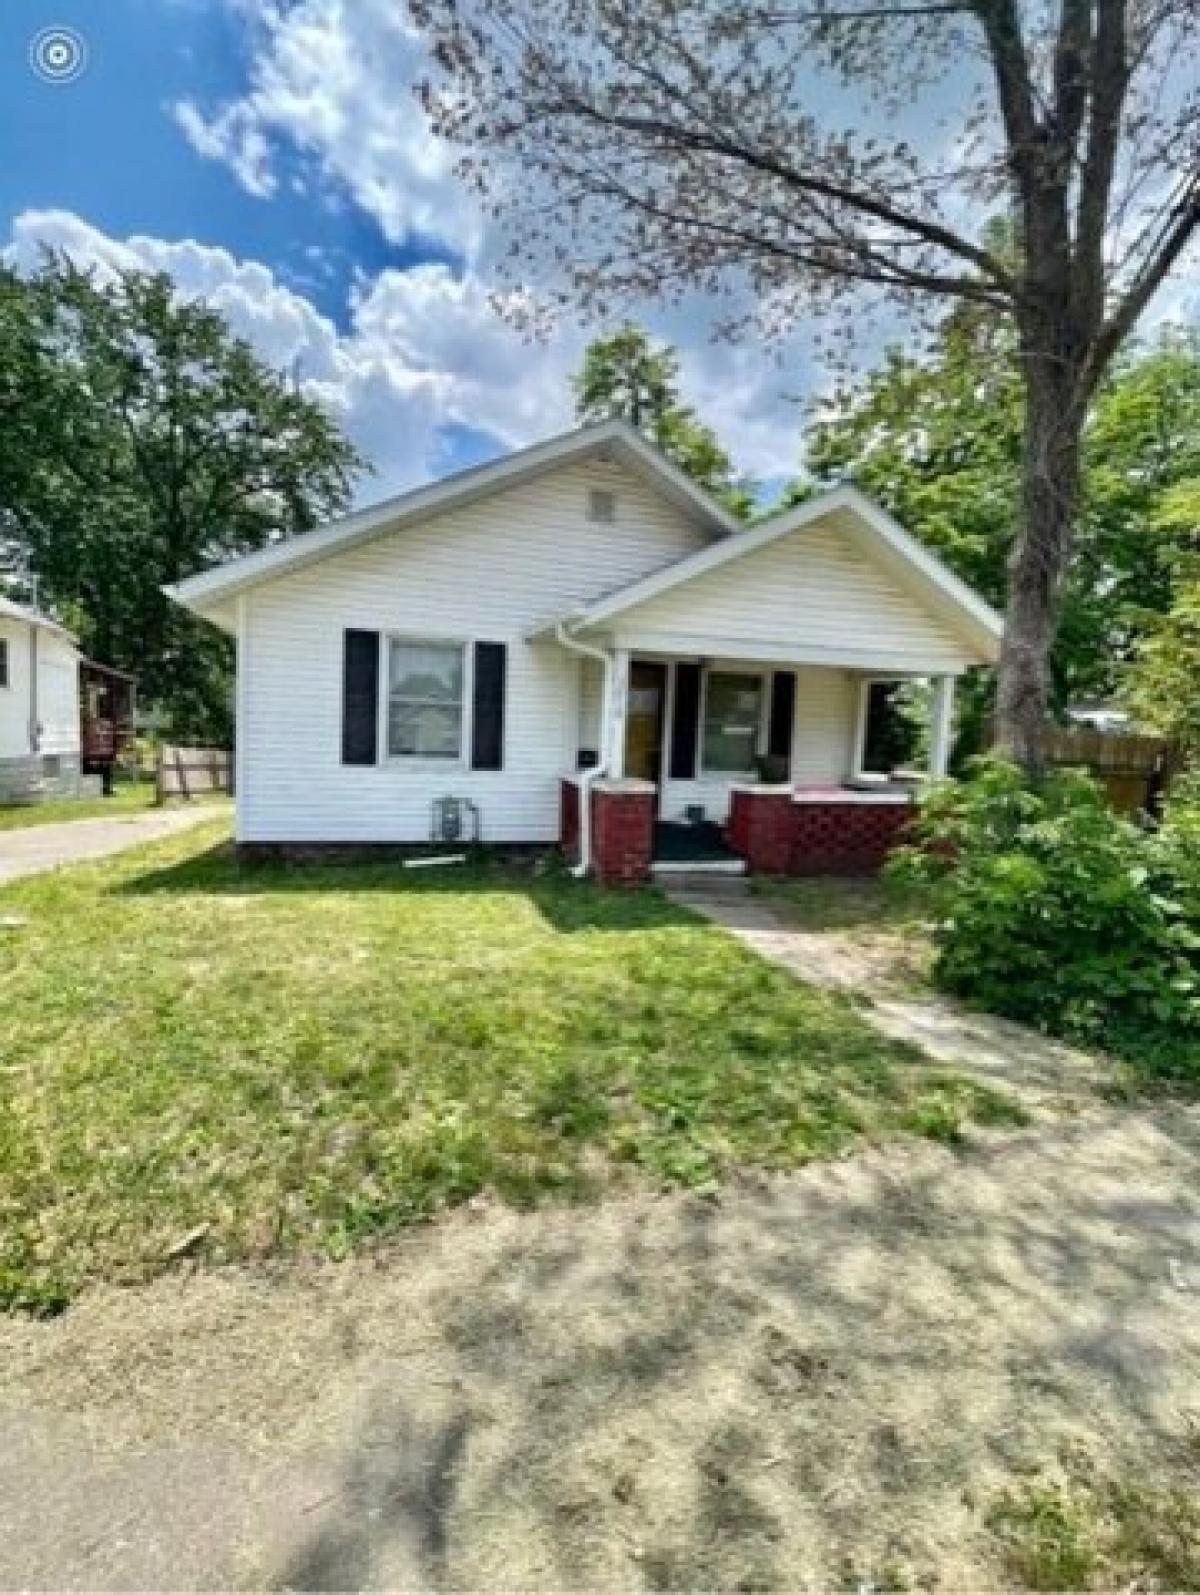 Picture of Home For Sale in Moberly, Missouri, United States